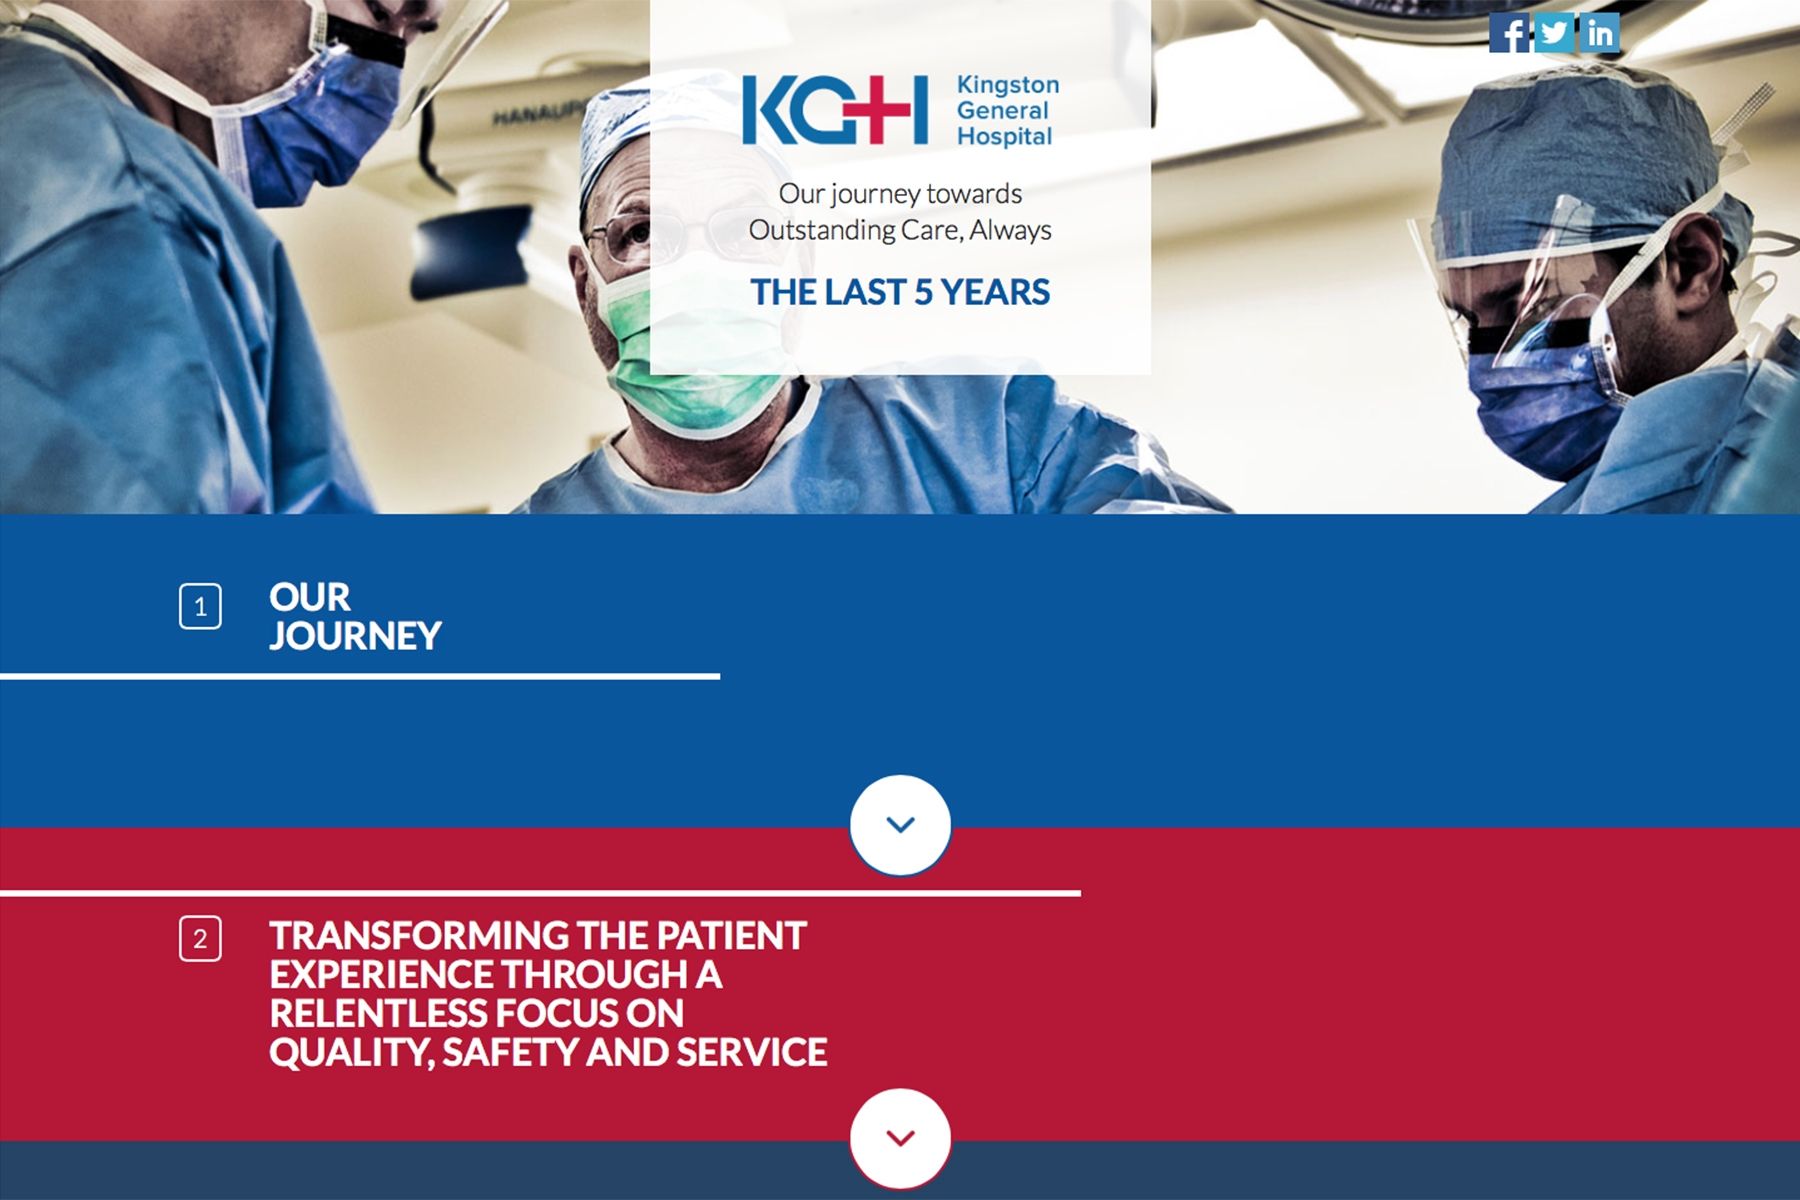 A screen capture of the landing page of the KGH Journey website.